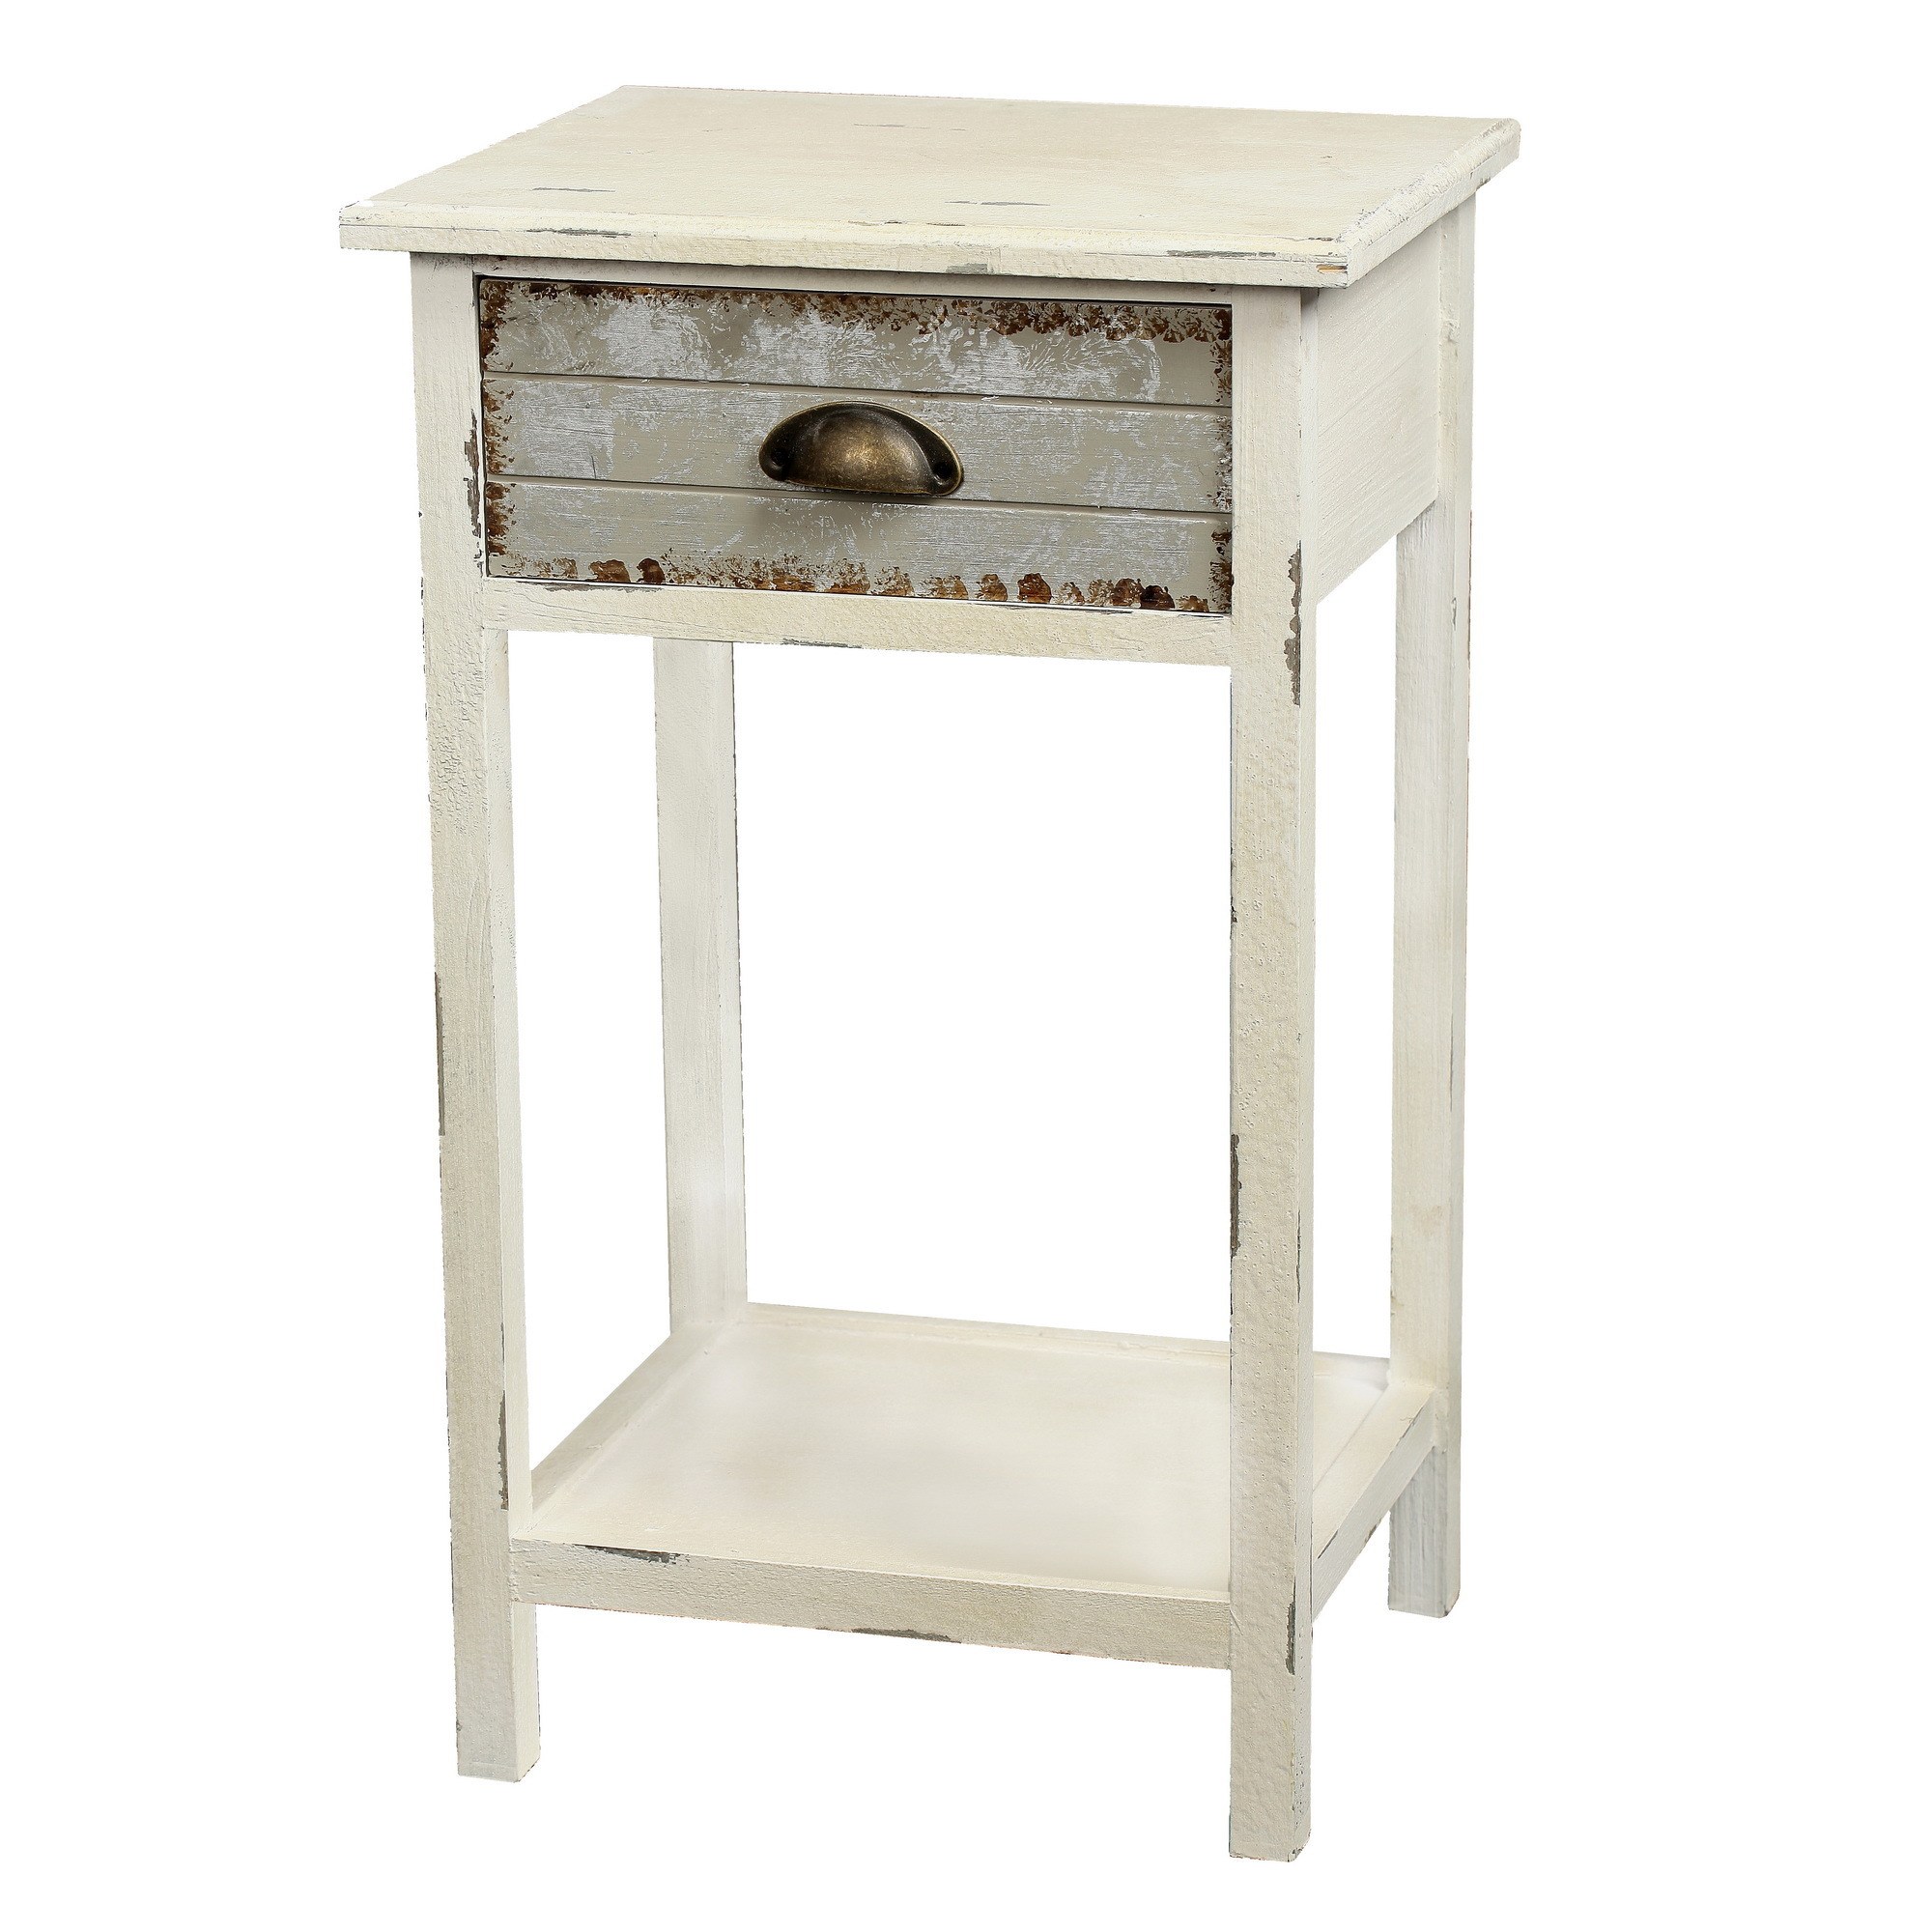 gallerie decor dover one drawer accent table free shipping today bathroom furniture square legs narrow console inches deep elastic covers pottery barn reclaimed wood dining coffee